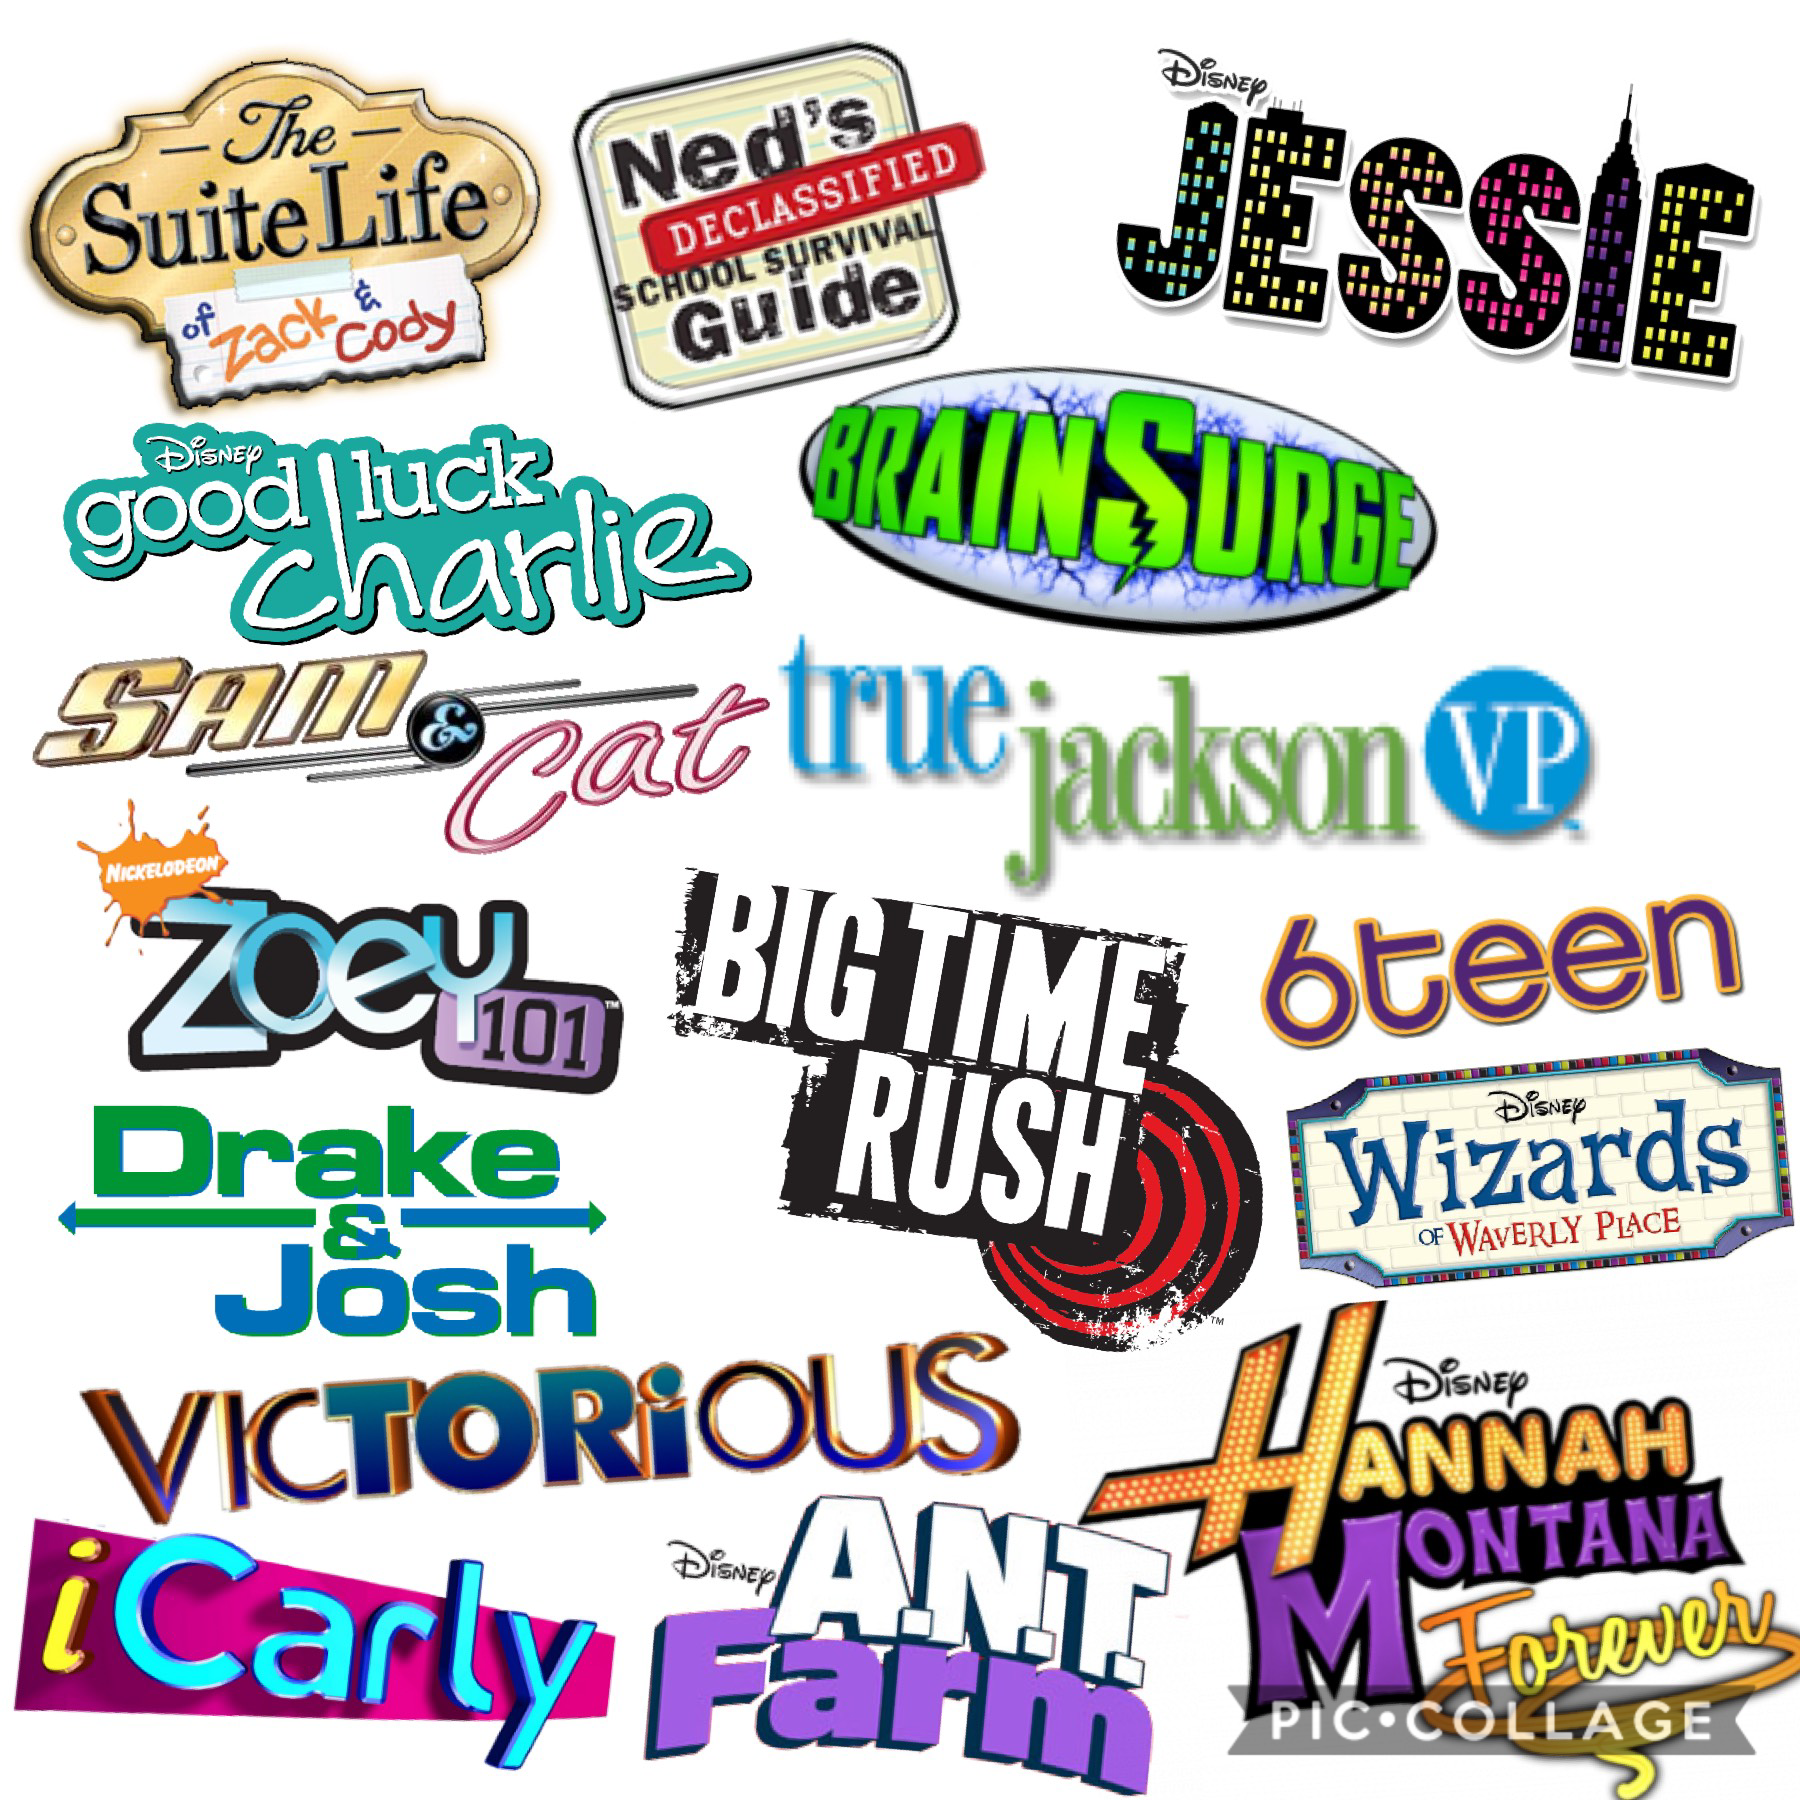 my favorite shows as a pre-teen/early teen